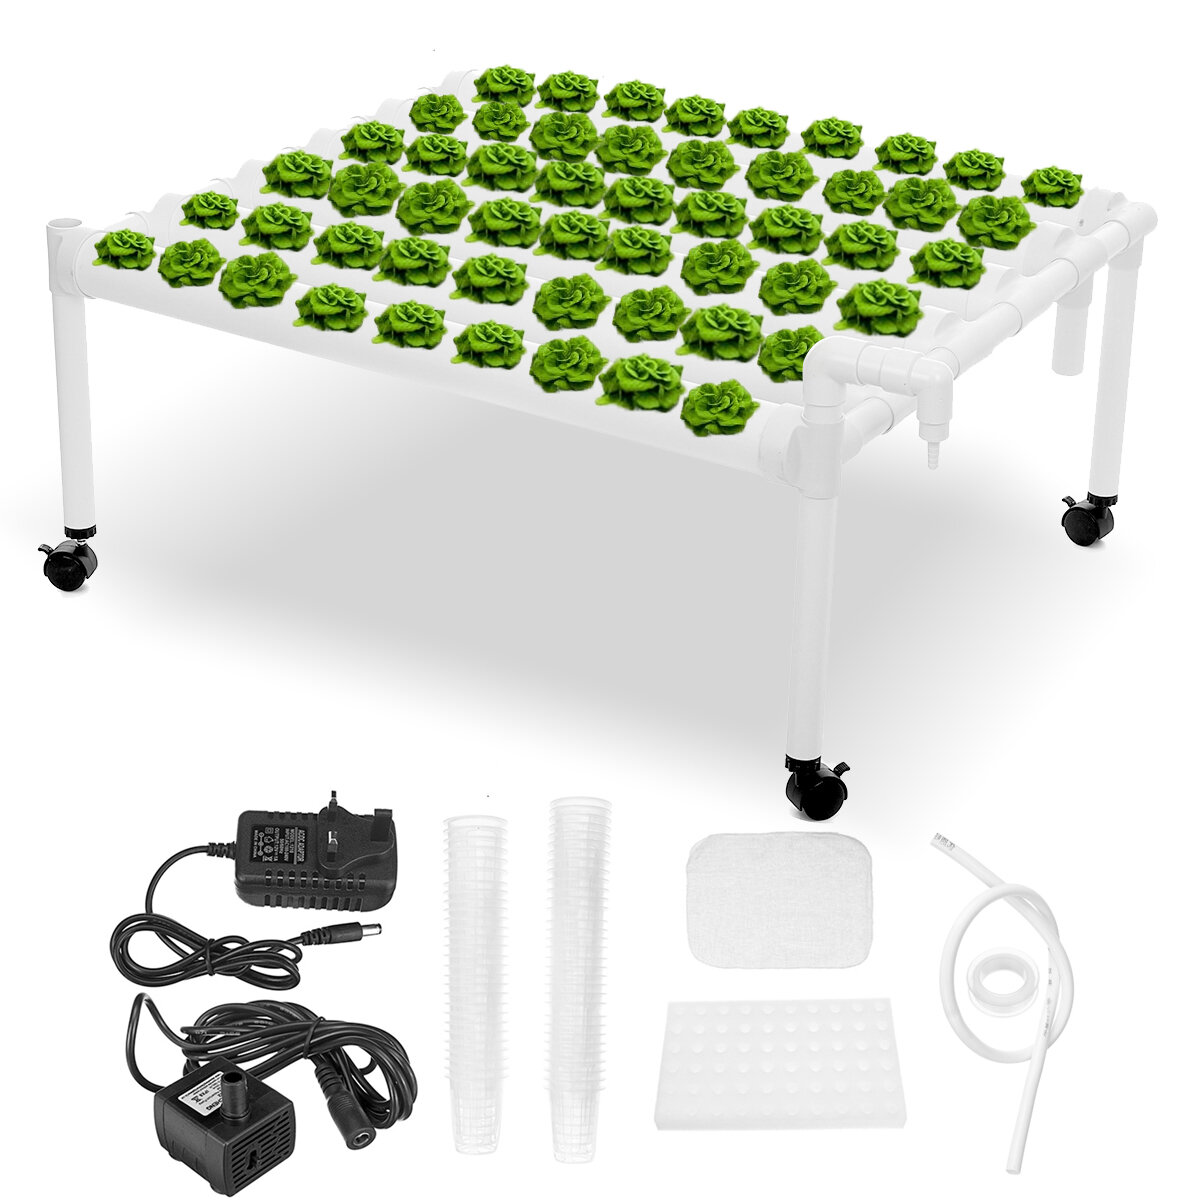 best price,220v,layer,hydroponic,growing,kit,pipes,holes,eu,discount